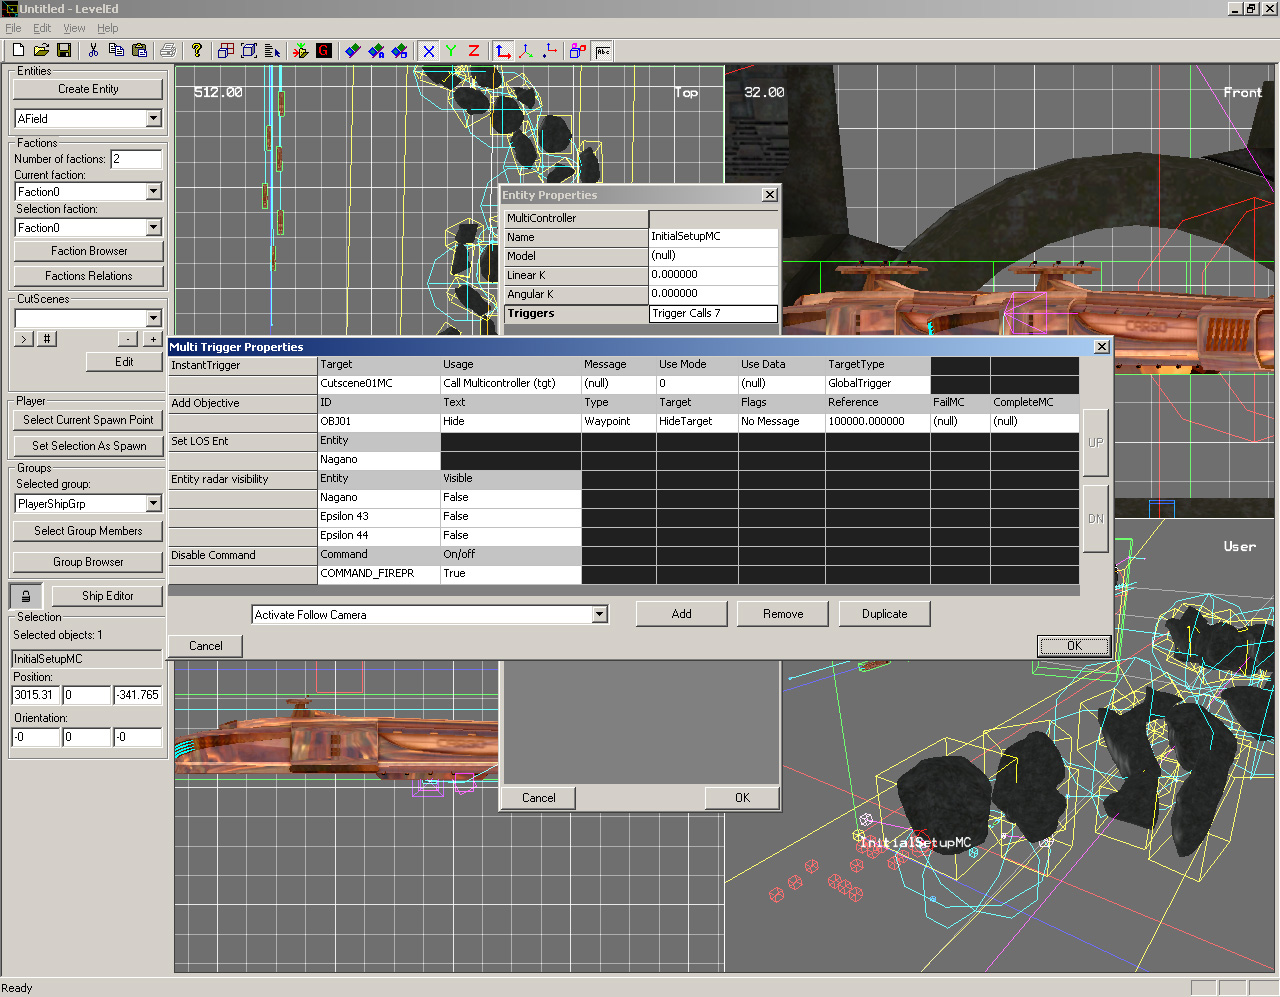 A typical work session in the level editor. Here we have the multicontroller editing interface.